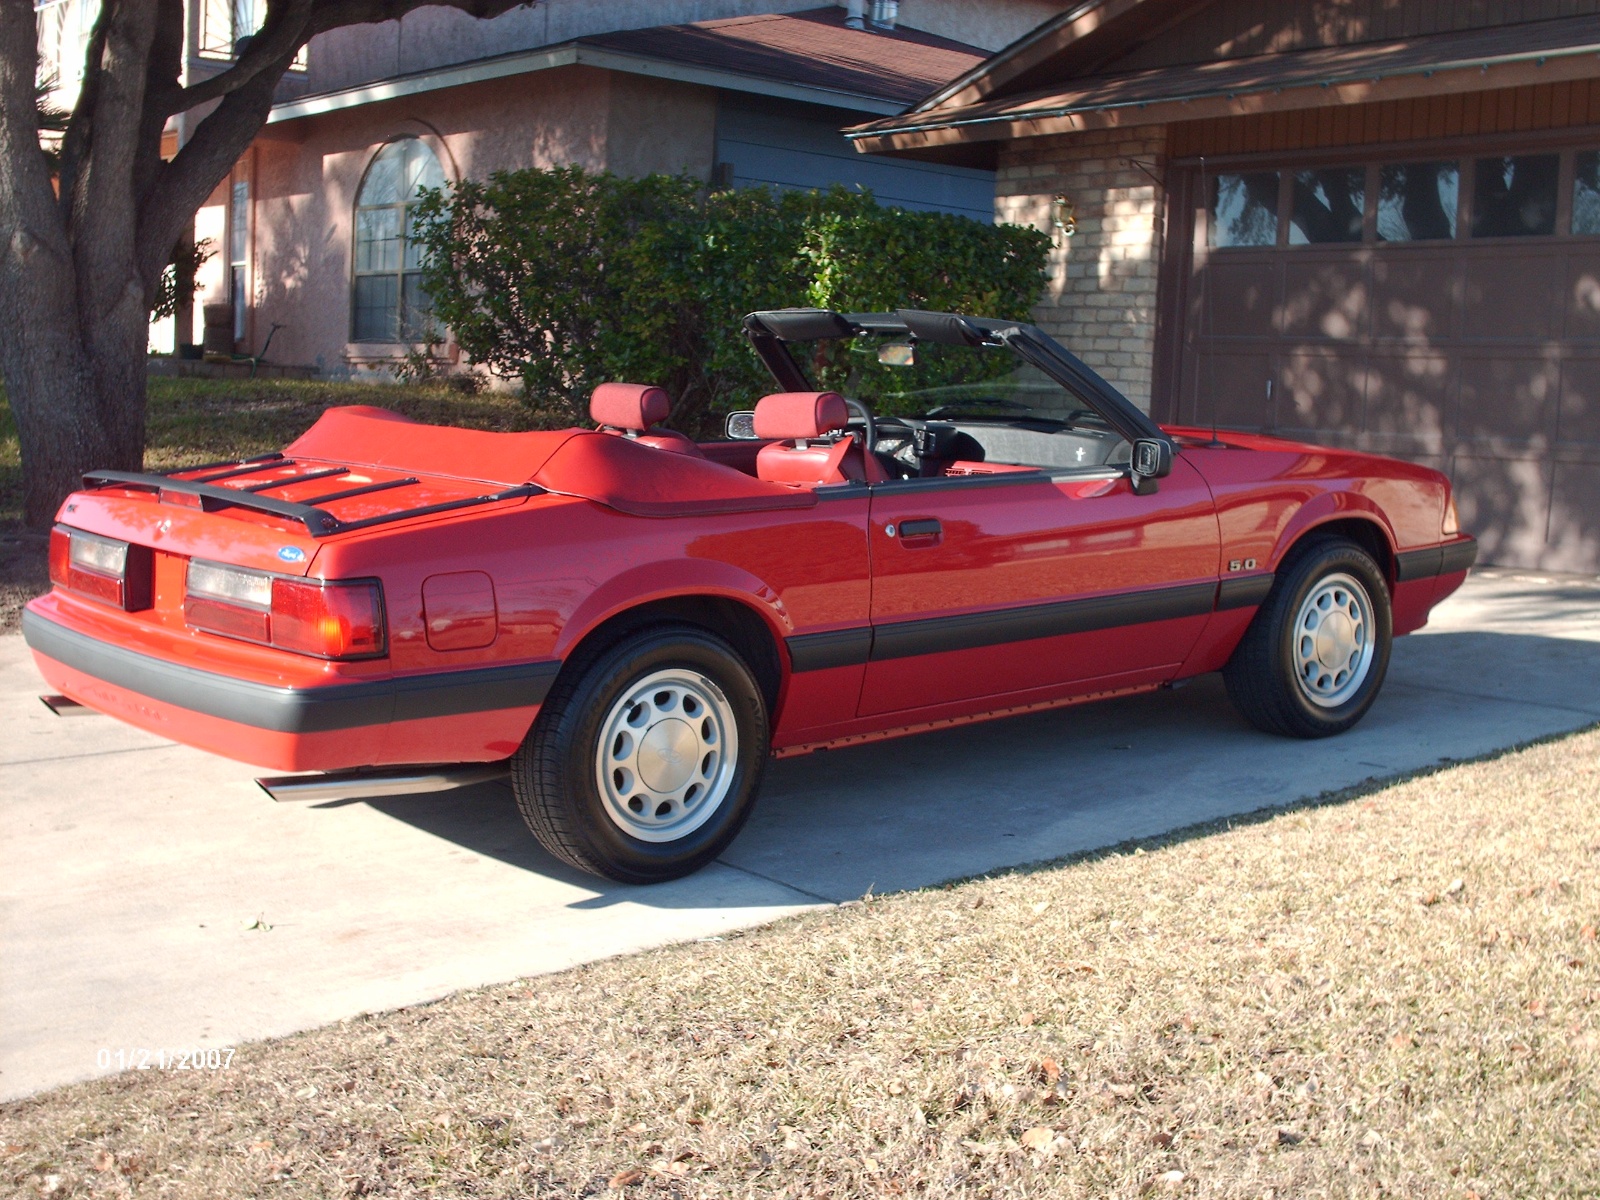 1990 Convertible ford lx mustang #1